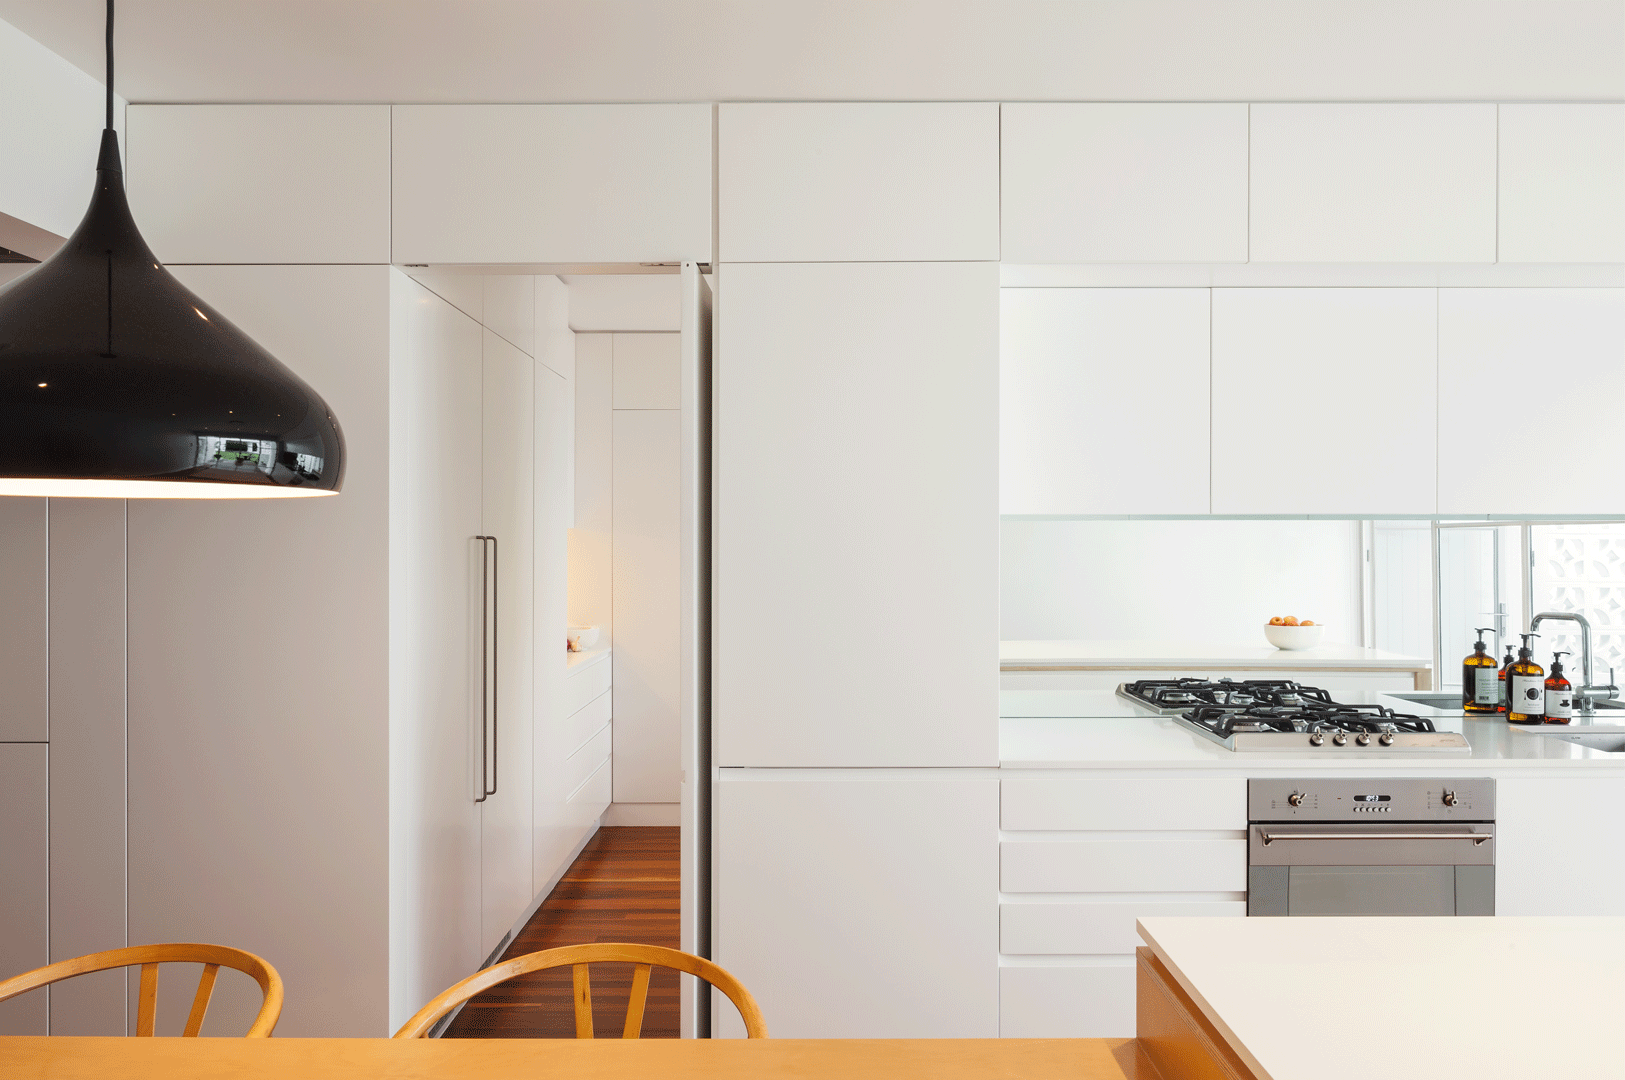 Breeze Block Home was reorganized to create a more contemporary open plan (8)